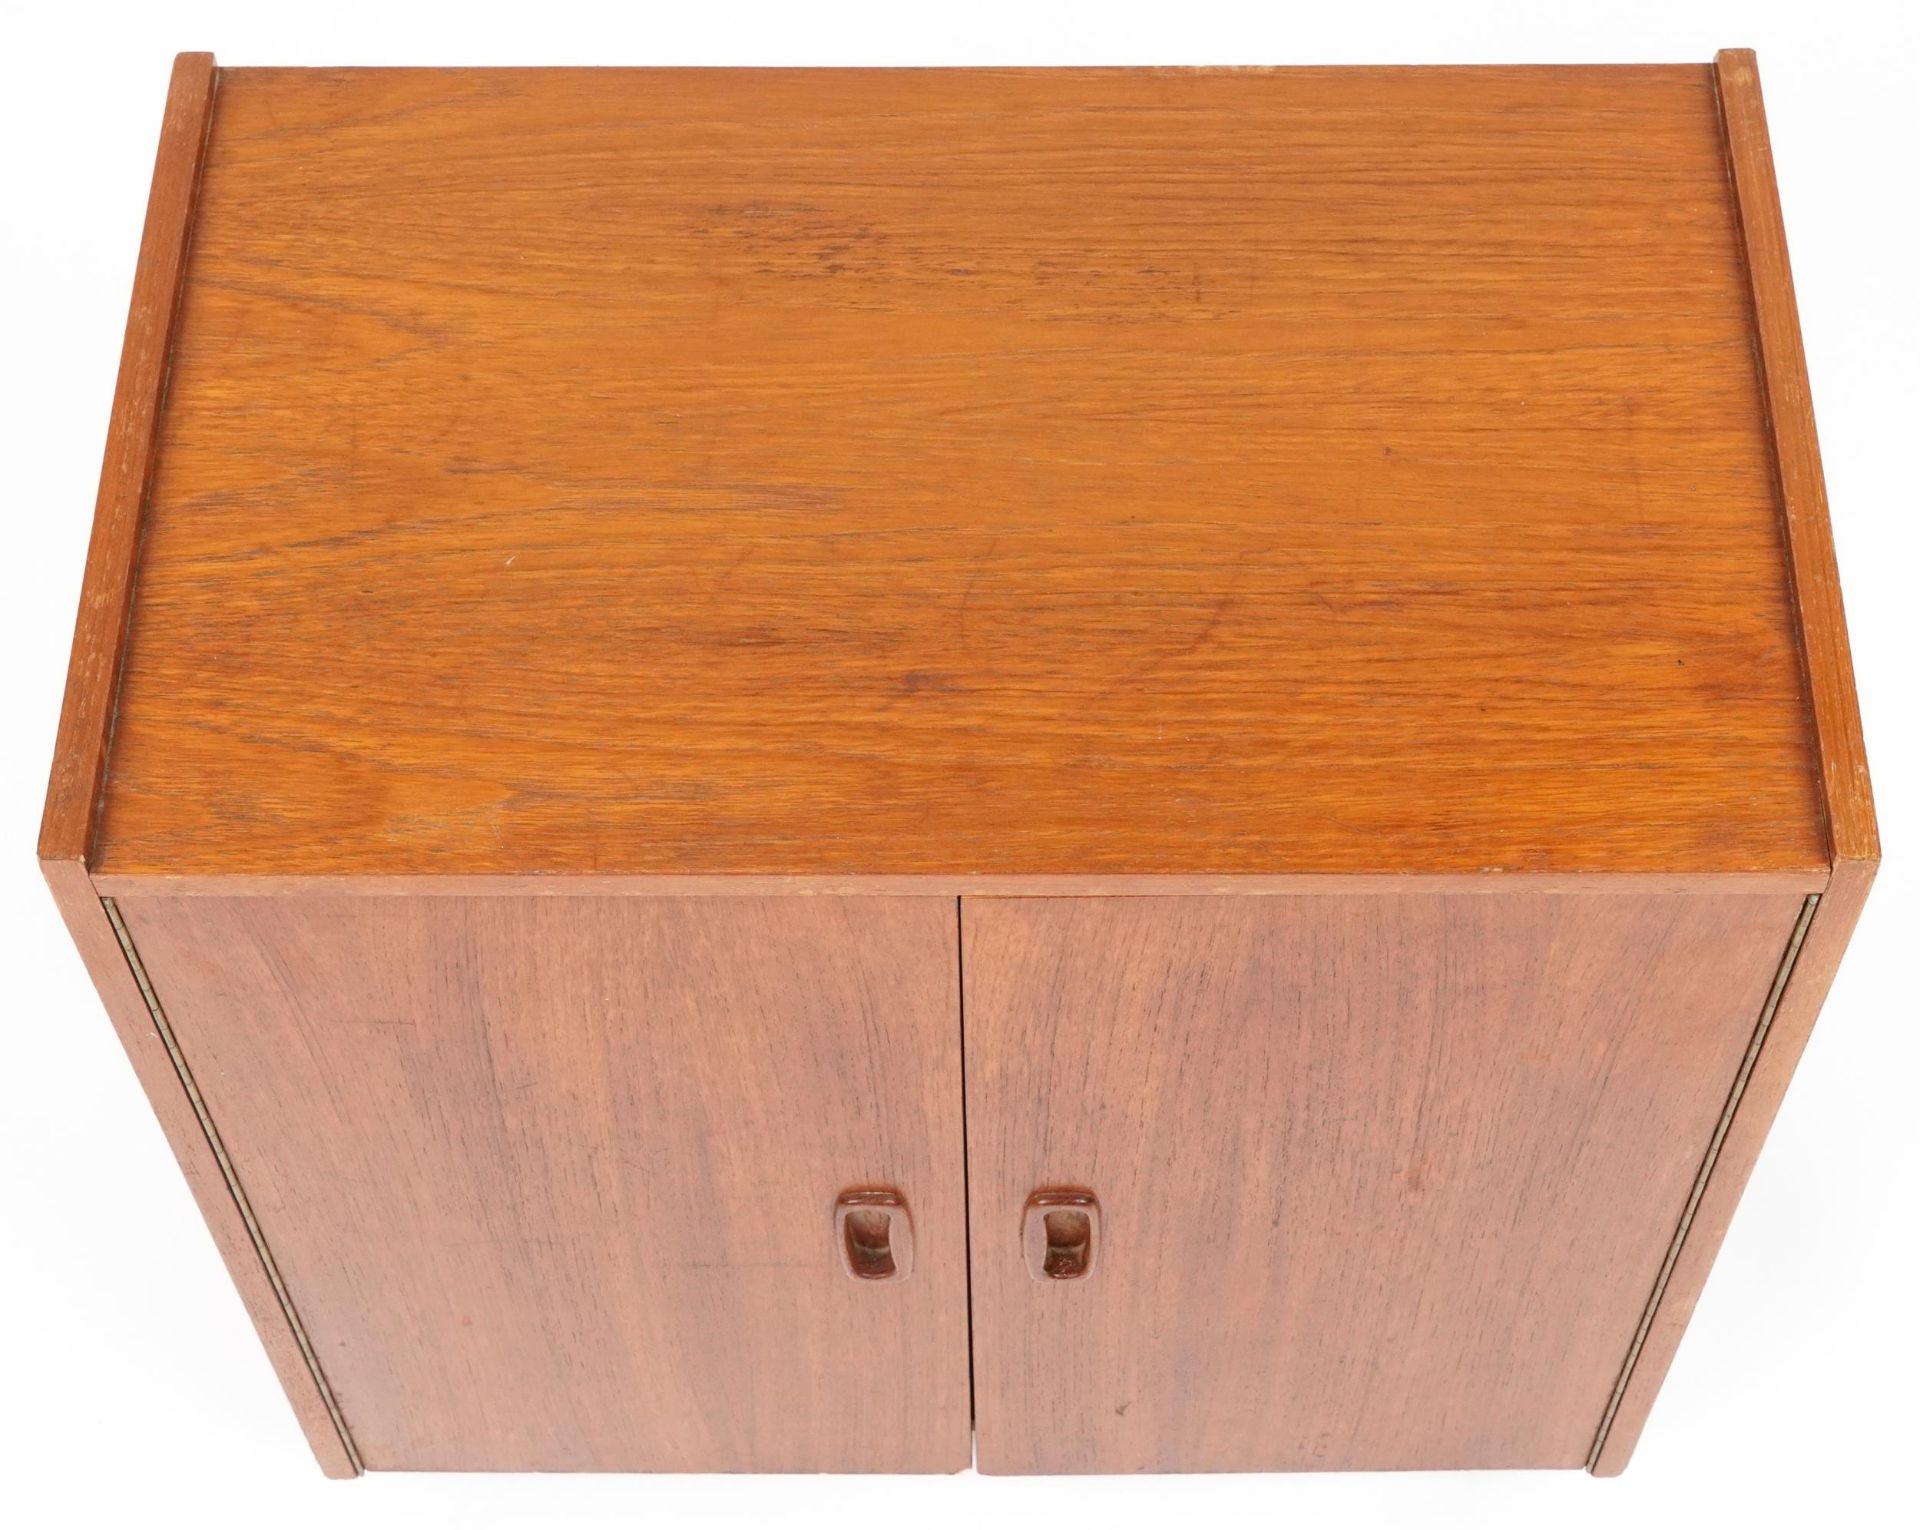 Mid century teak two door side cupboard with fitted interior, 65cm H x 61cm W x 36cm D - Image 3 of 5